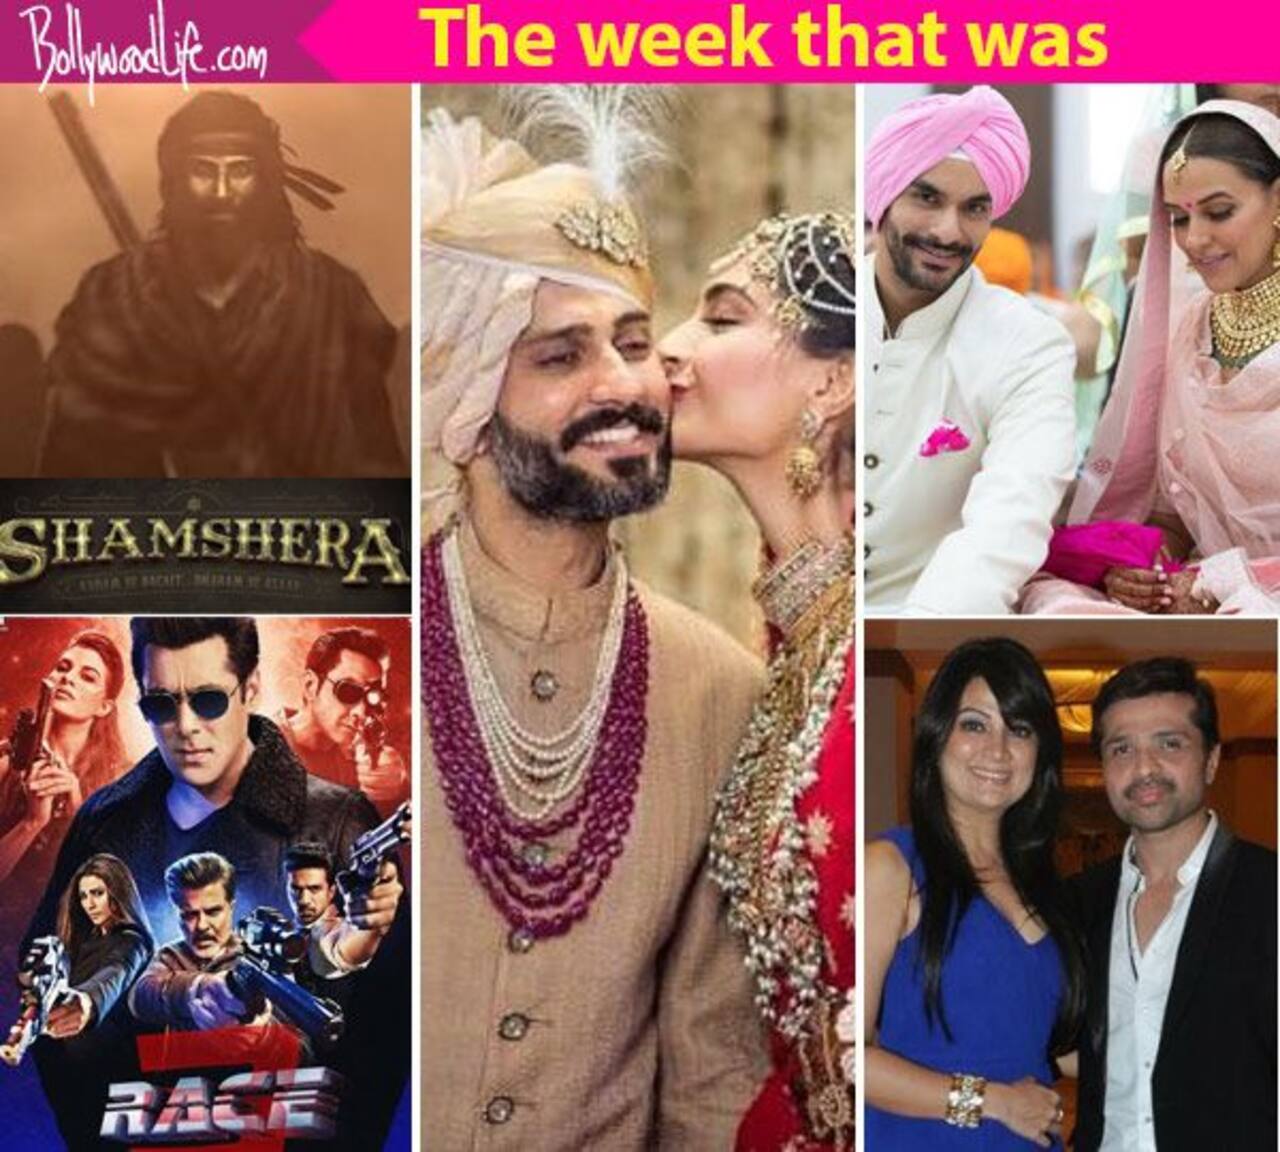 From Sonam Kapoor's wedding to Race 3 trailer announcement, here are the top 5 Bollywood newsmakers that made noise last week